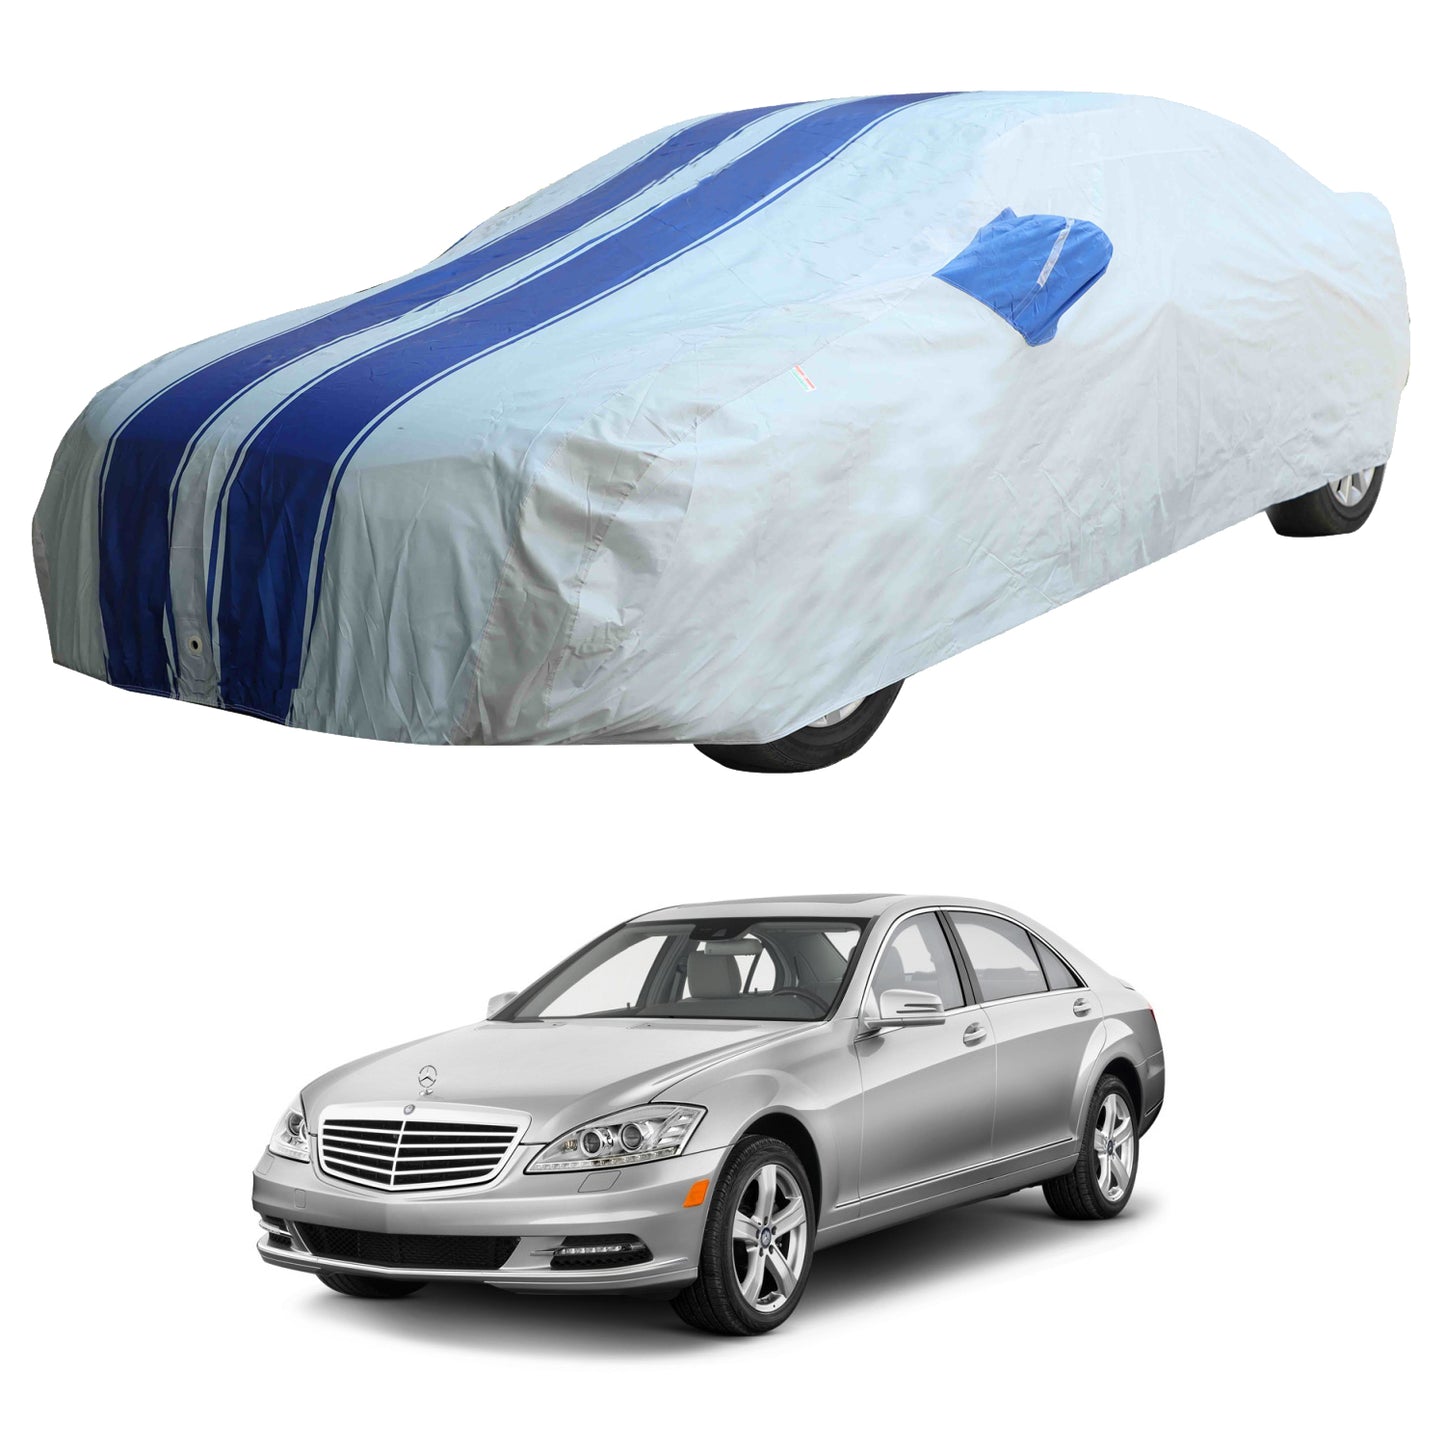 Oshotto 100% Blue dustproof and Water Resistant Car Body Cover with Mirror Pockets For Mercedes Benz S Class